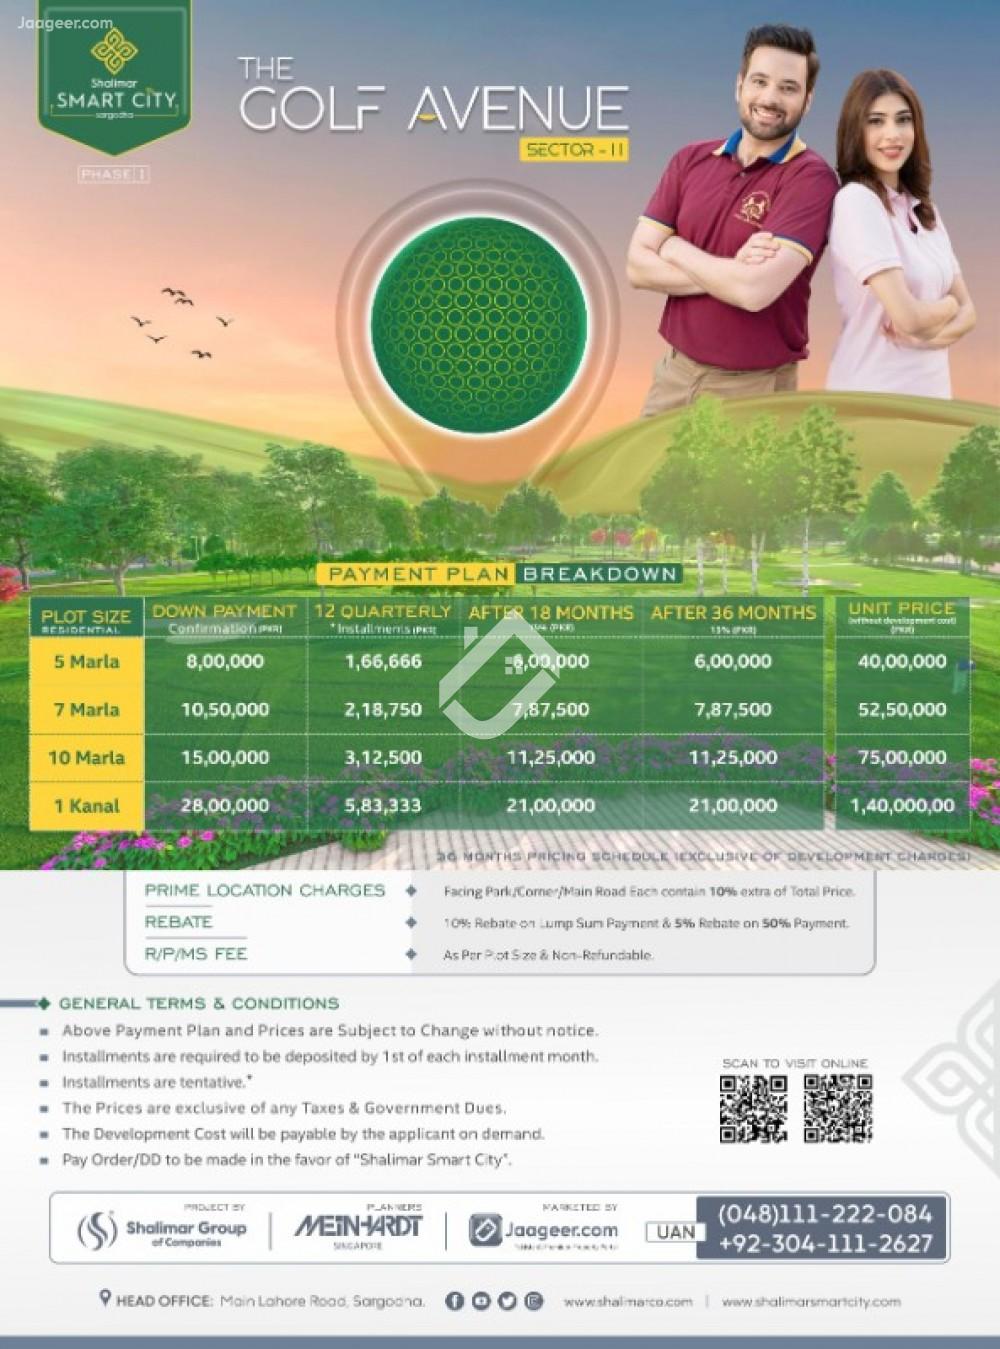 View  5 Marla Residential Plot For Sale In Shalimar Smart City Phase -1 The Golf Avenue Sector-II in Shalimar Smart City, Sargodha